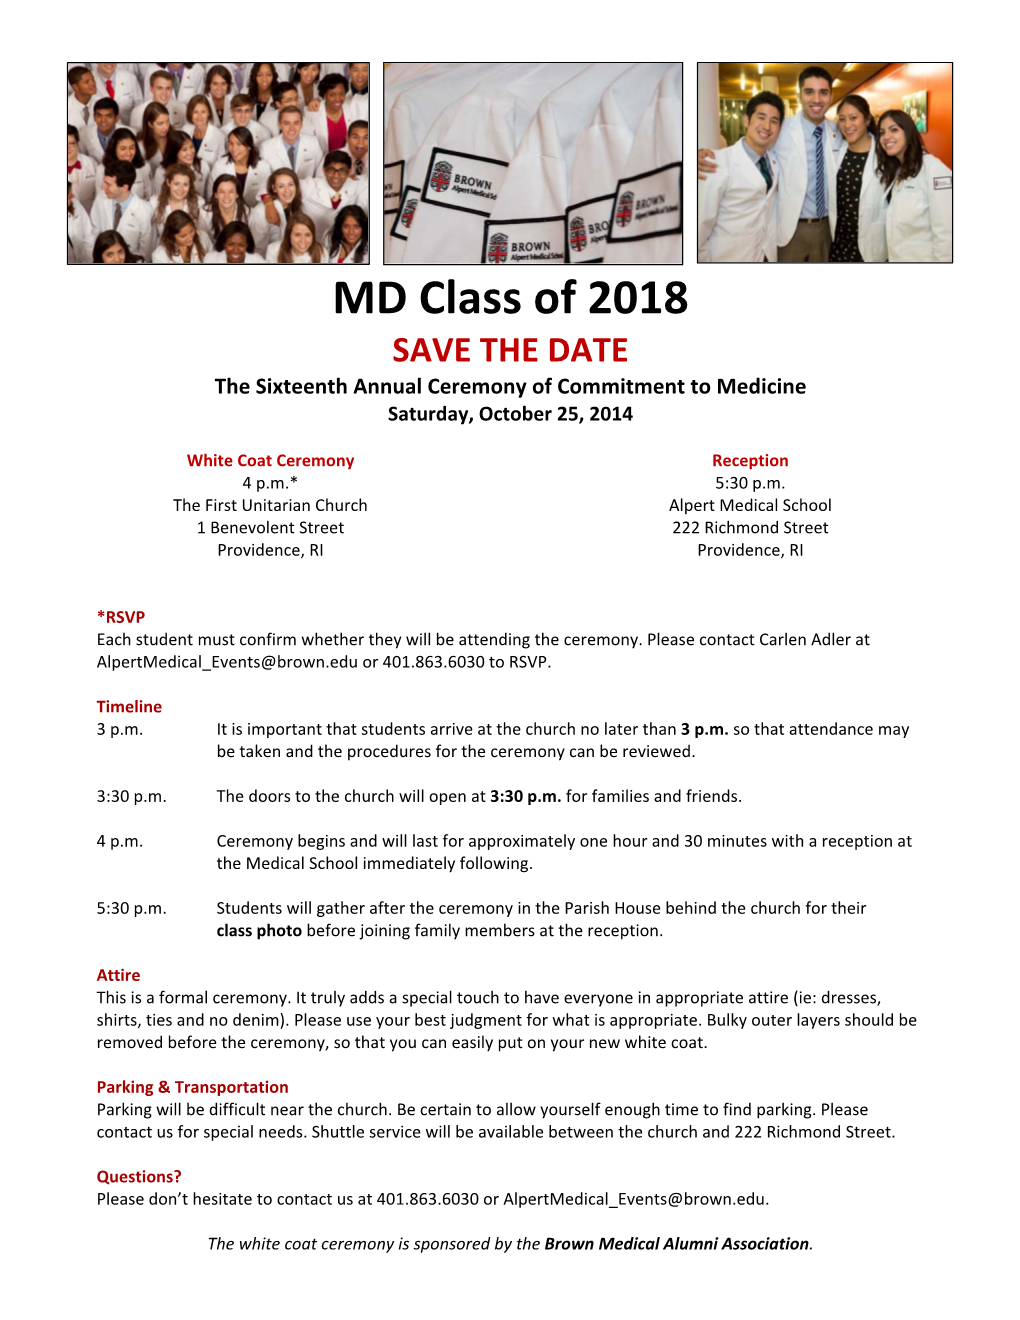 MD Class of 2018 SAVE the DATE the Sixteenth Annual Ceremony of Commitment to Medicine Saturday, October 25, 2014